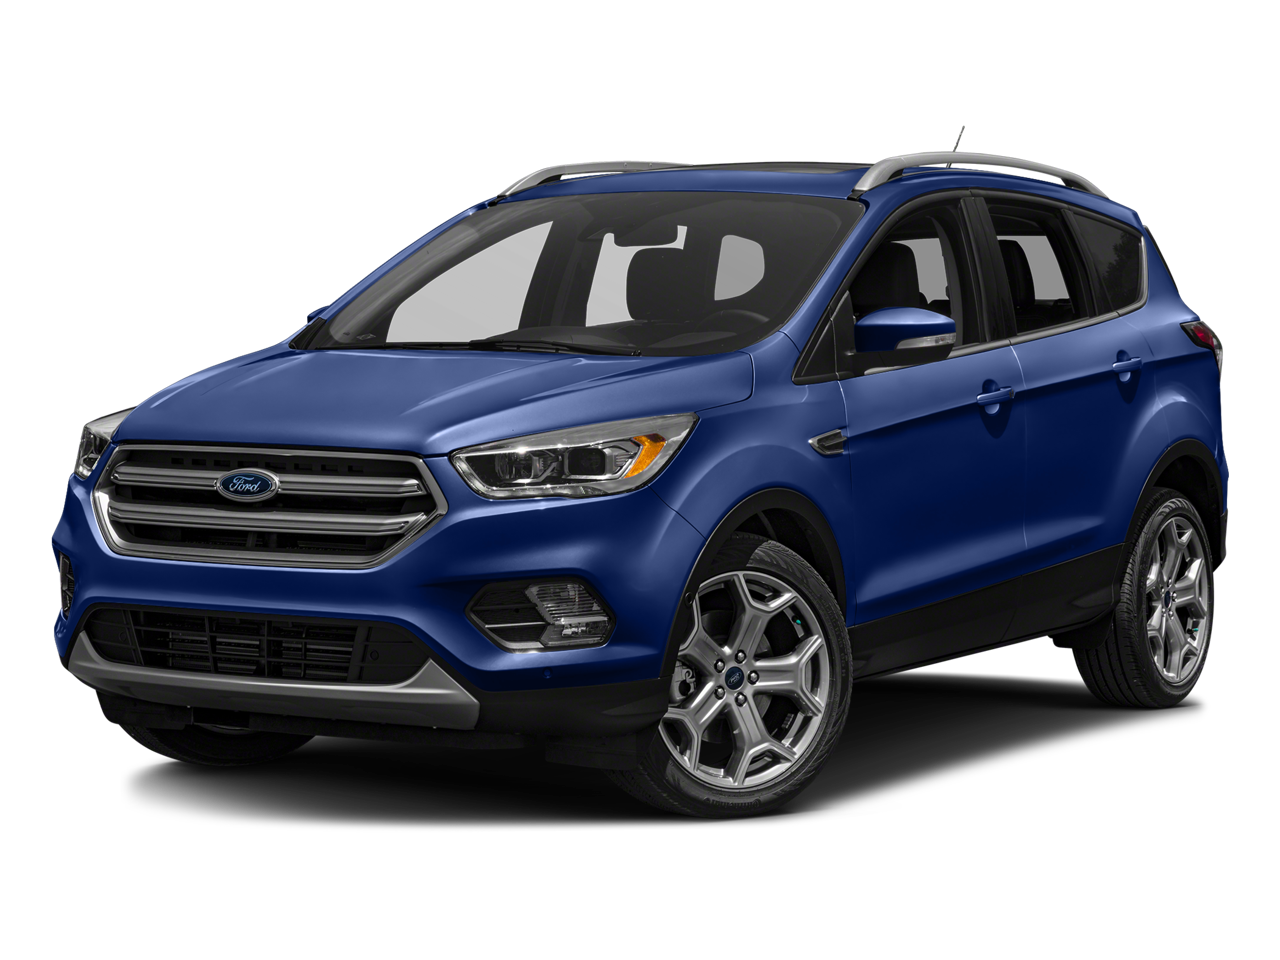 Used 2017 Ford Escape Titanium with VIN 1FMCU0J98HUB35306 for sale in Fayetteville, GA